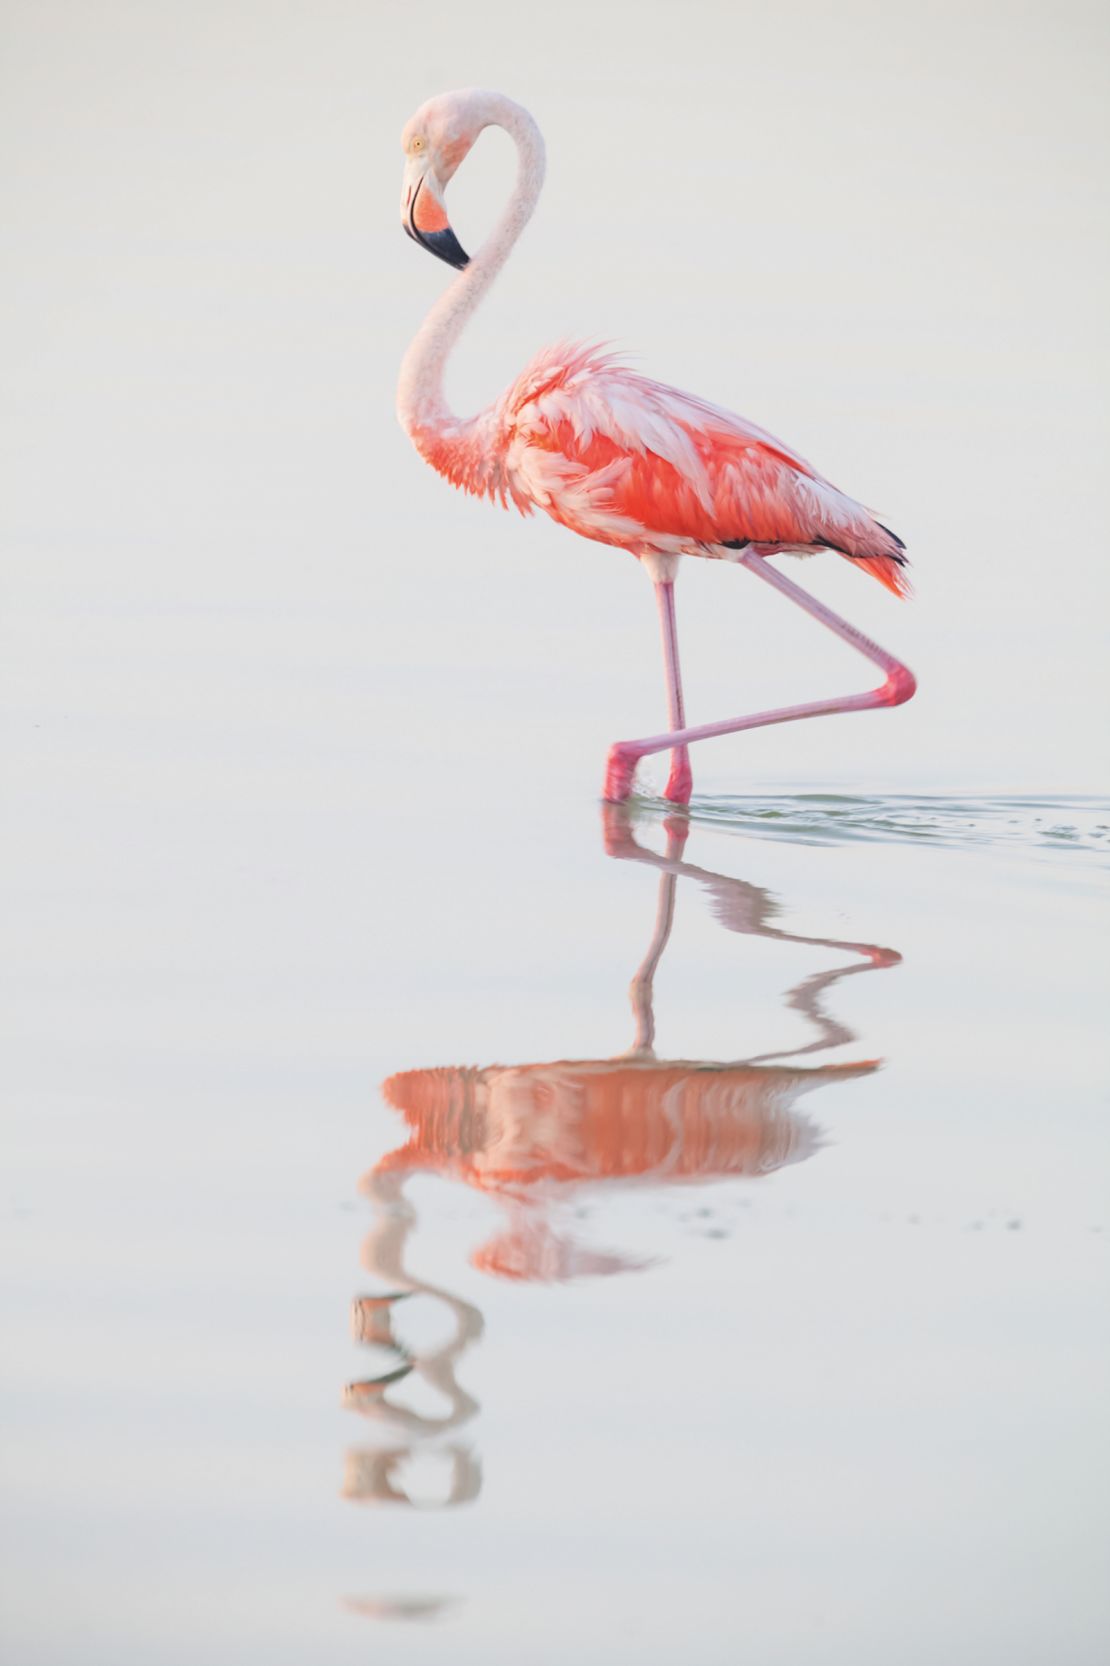 Flamingos use their hooked beaks to feed on shrimp, mollusks and algae that are rich in carotenoids, the pigment that gives them their pink coloring.